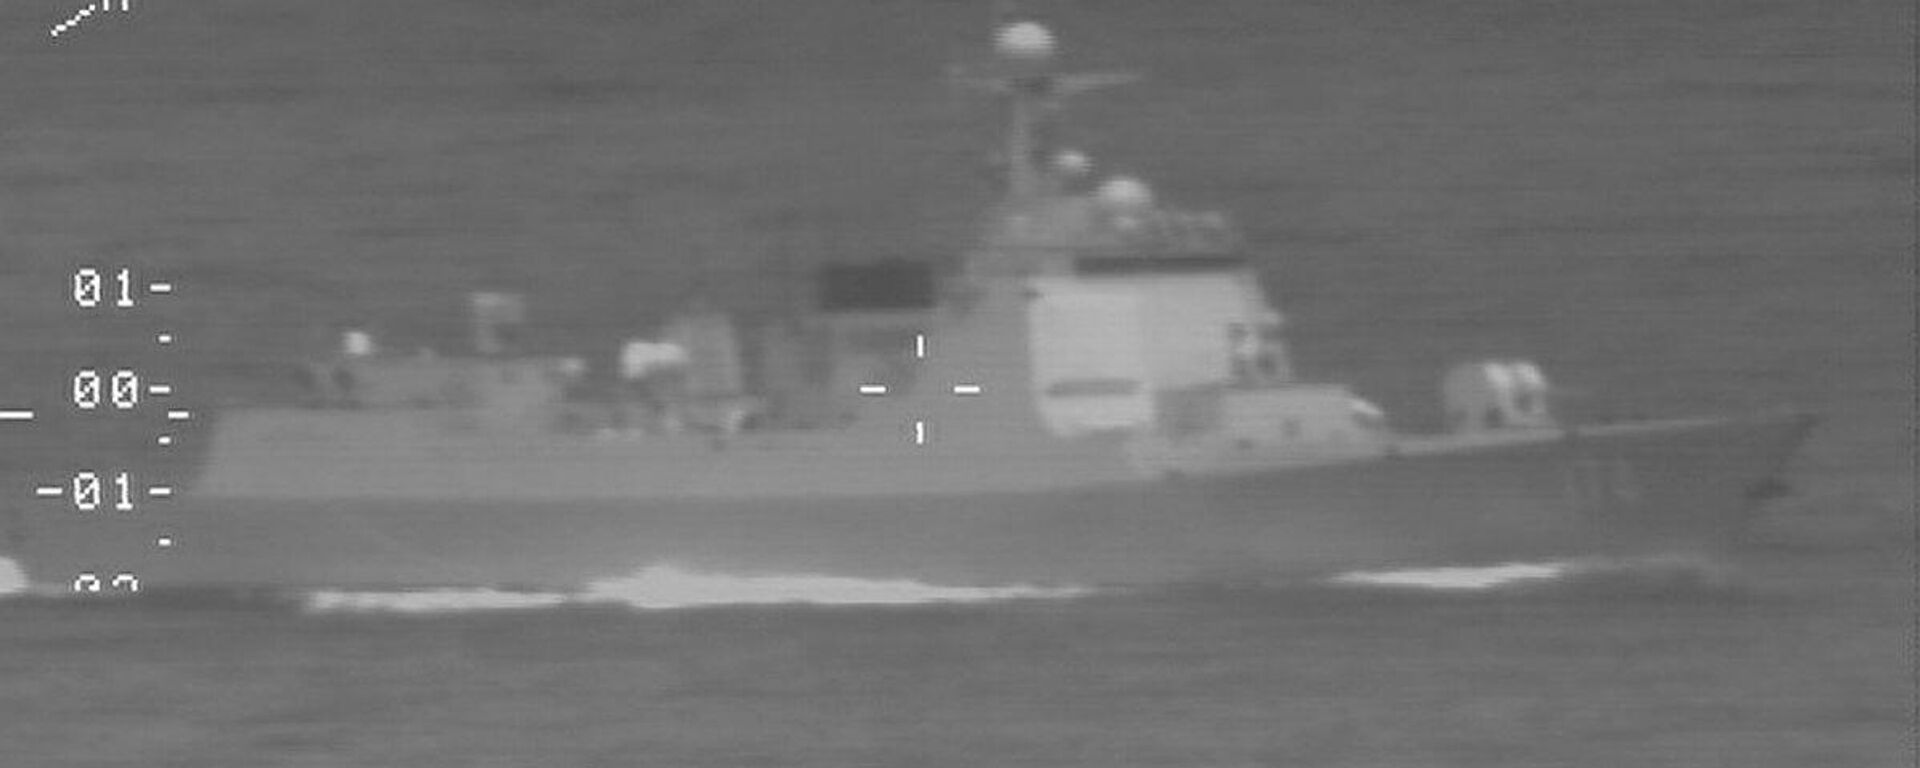 A Royal Australian Air Force (RAAF) reconnaissance photo of a Peoples Liberation Army-Navy Luyang-class guided missile destroyer involved in a lasing incident with an RAAF P-8A Poseidon maritime patrol aircraft. - Sputnik International, 1920, 21.02.2022